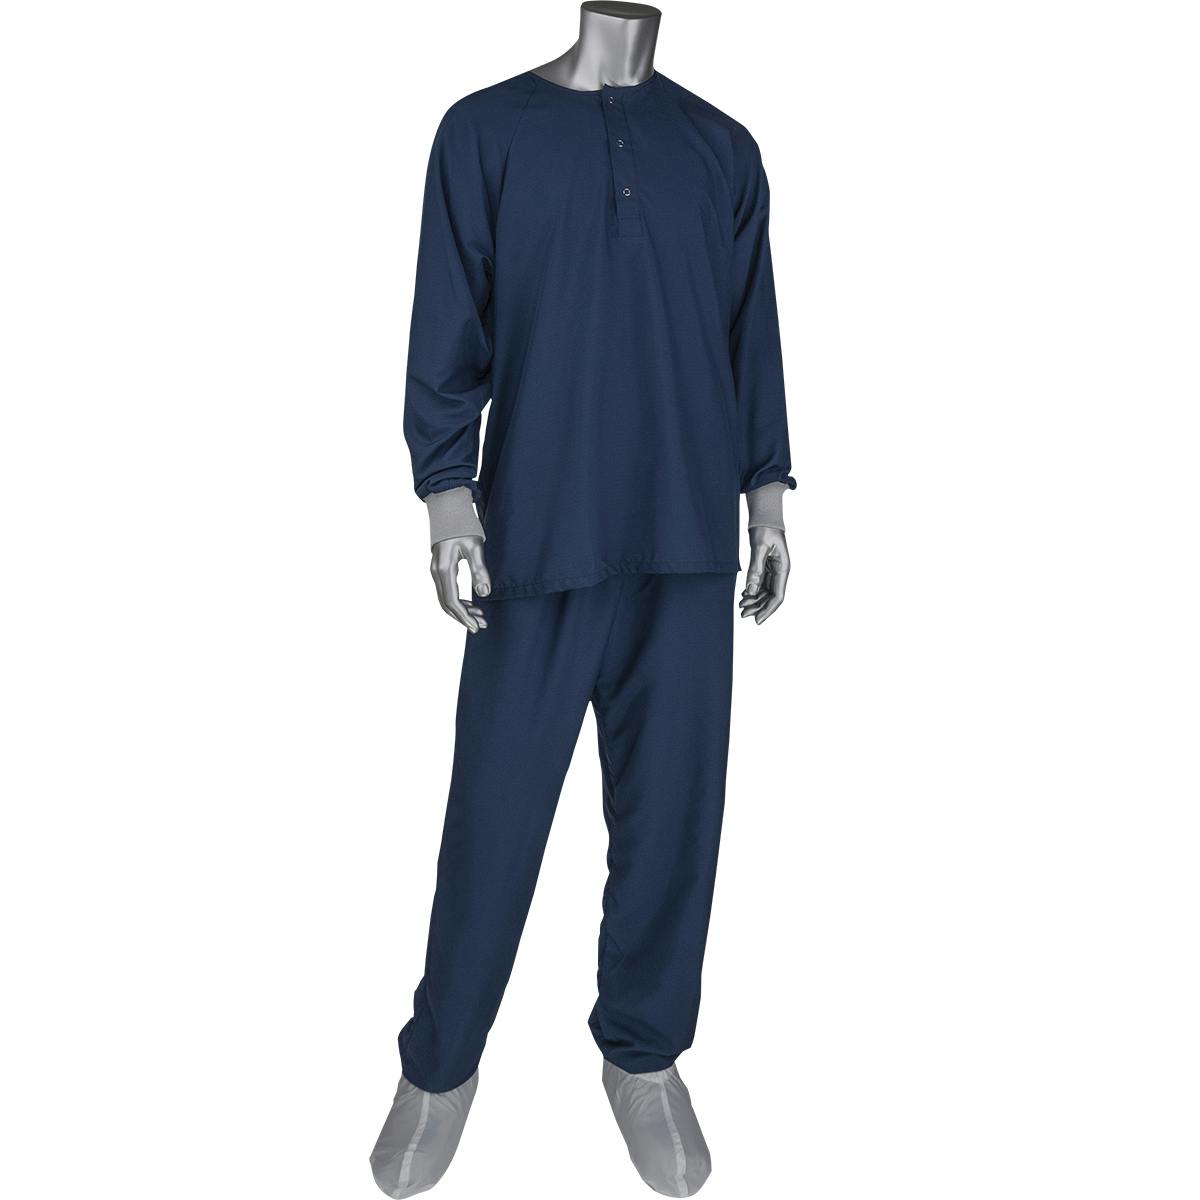 Microdenier ESD Sitewear Top, Navy (HSCTM3-48NV)